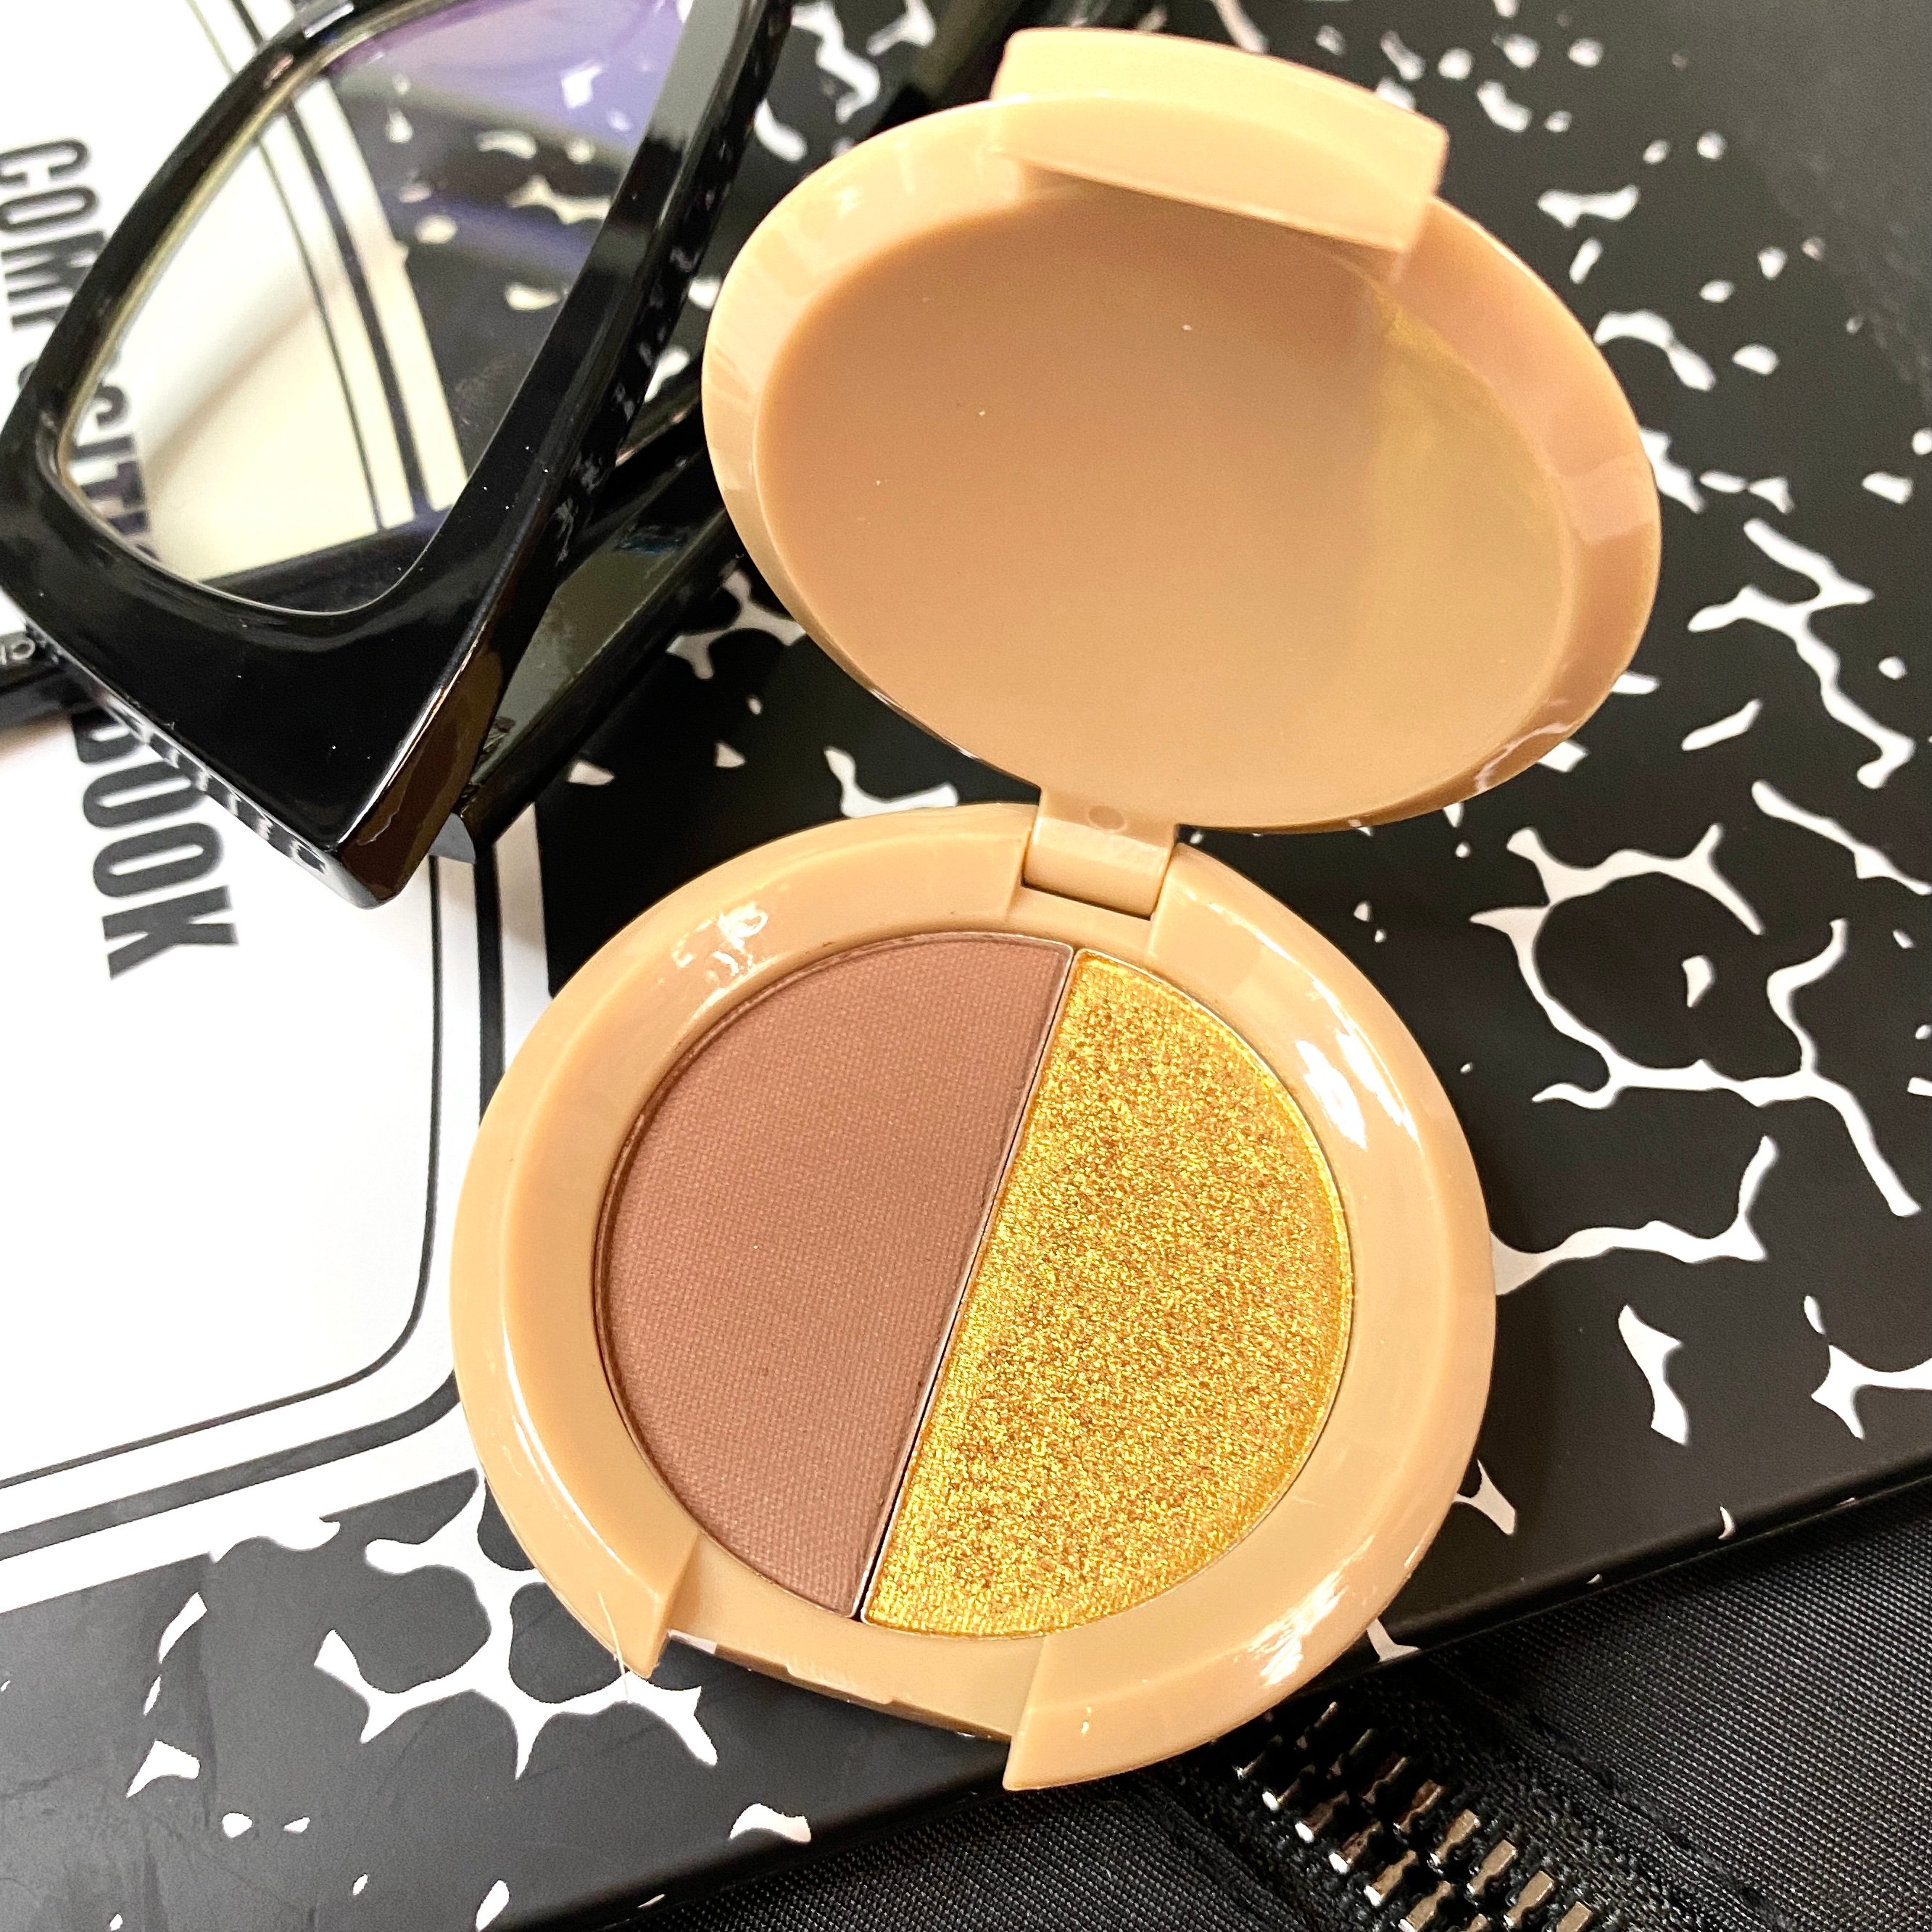 IBY Beauty Carry On Eyeshadow Duo in Glamping and First Class for Ipsy Glam Bag September 2021